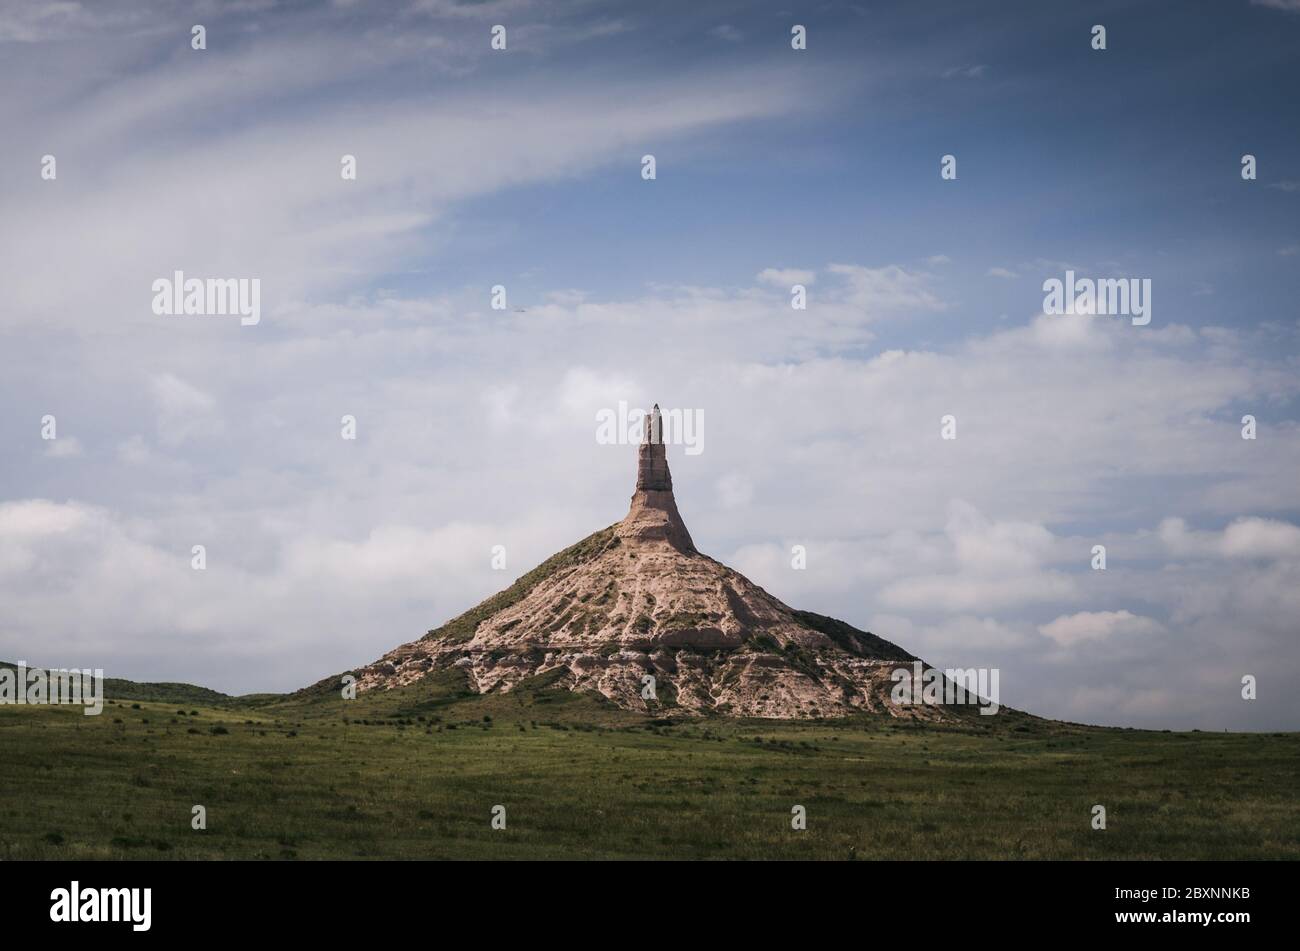 Cattle graze under Chimney Rock, a symbol used by pilgrims to mark the Oregon Trail. Stock Photo